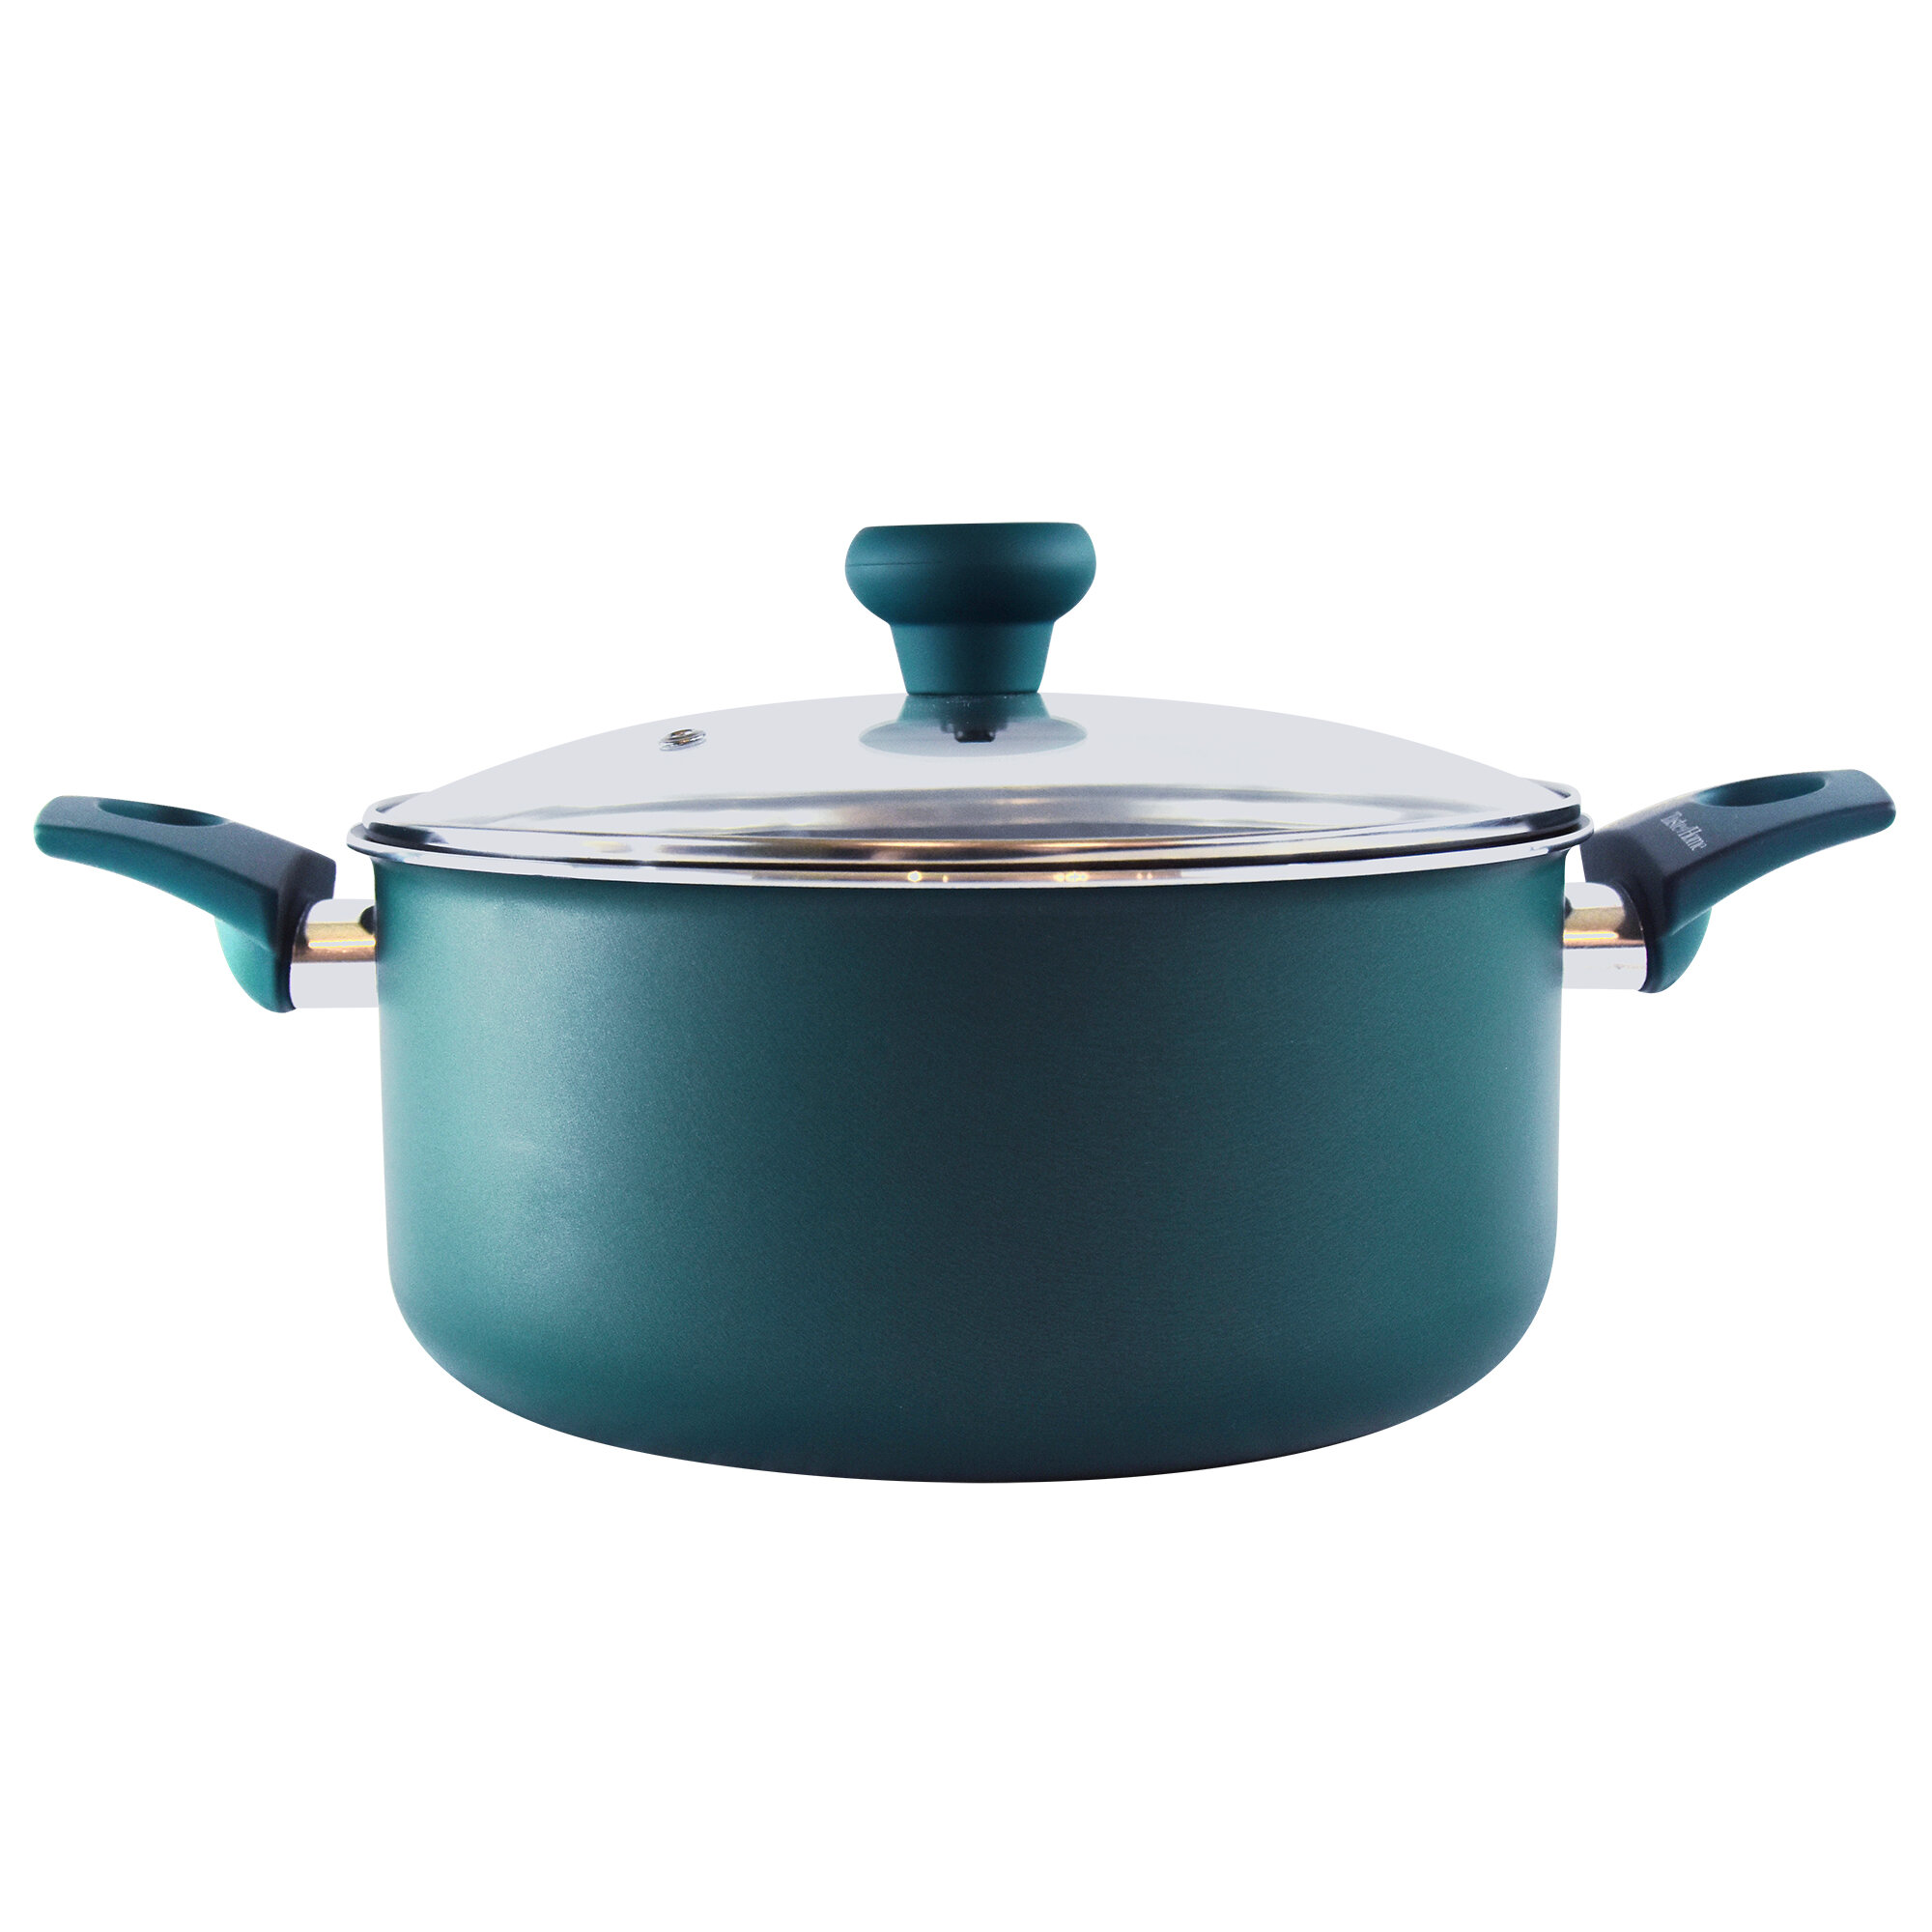 Taste of Home 5-quart Enameled Cast Iron Dutch Oven with Lid 